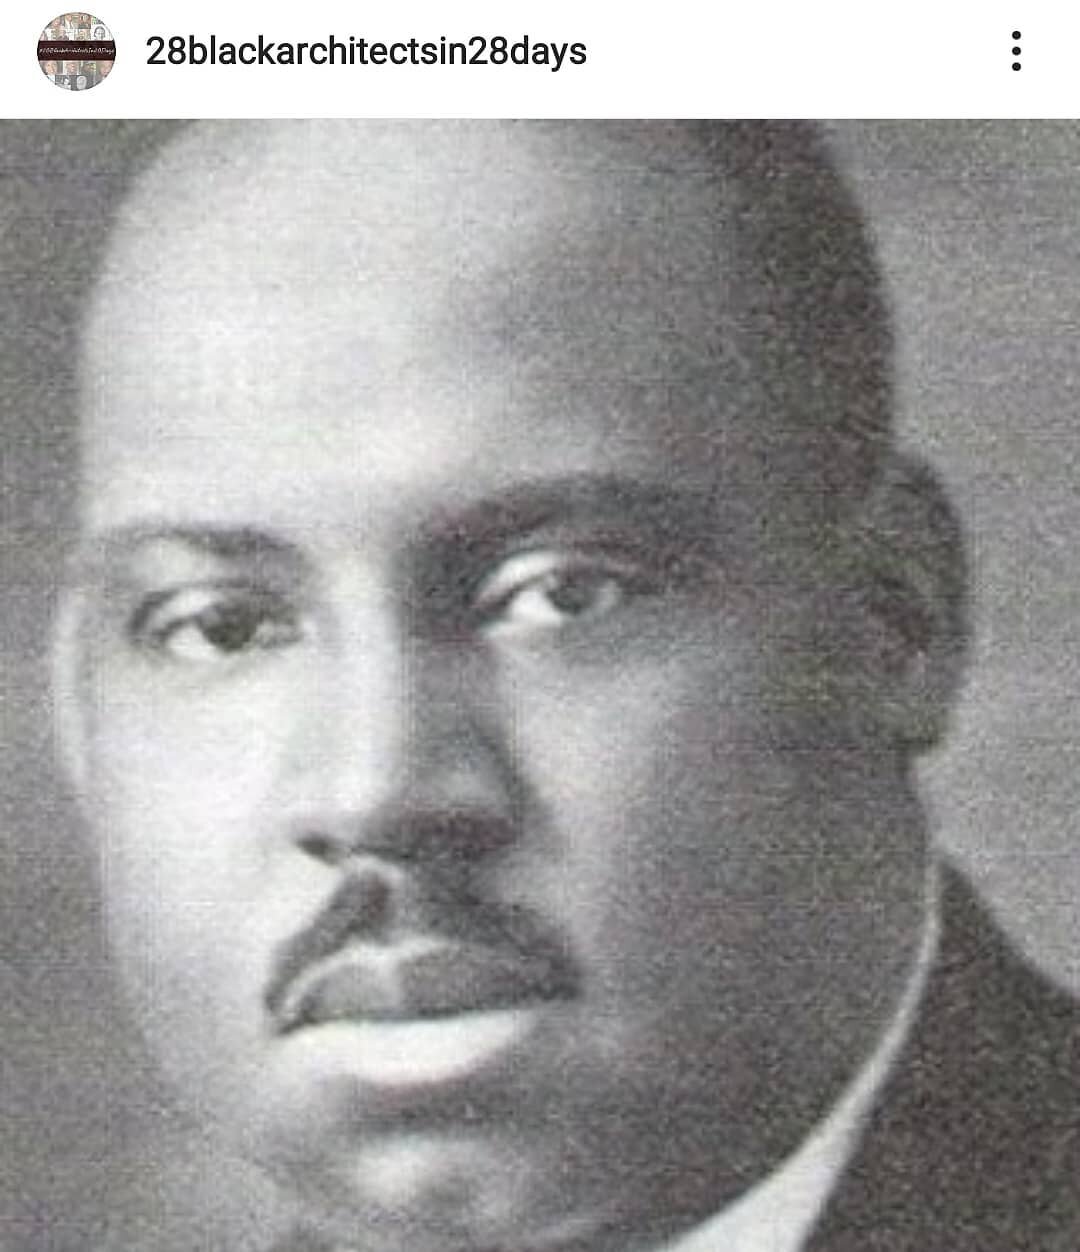 Meet our first #BlackArchitect of the month, Albert Cassell, responsible for the design of many of Howard University's buildings!! 

Like and Follow @28blackarchitectsin28days to learn more!
.
#28BlackArchitectsIn28Days